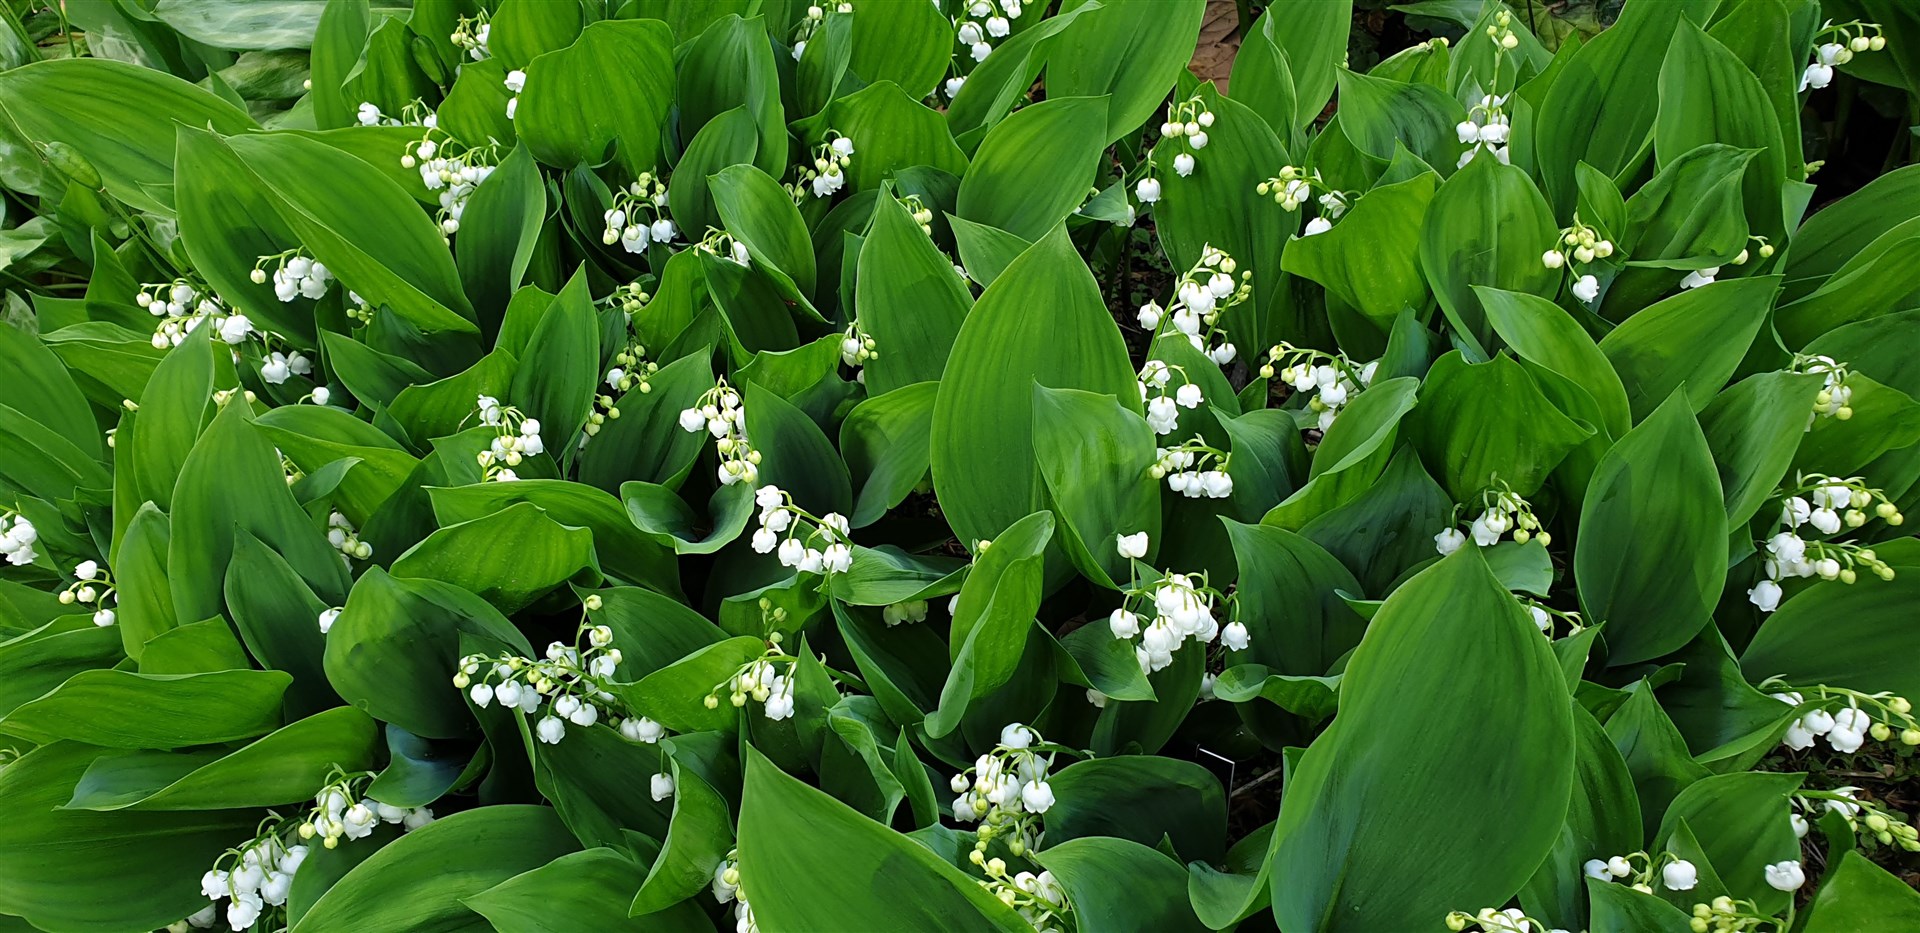 The lily of the valley, one of the Queen’s favourite flowers (Buckingham Palace/PA)